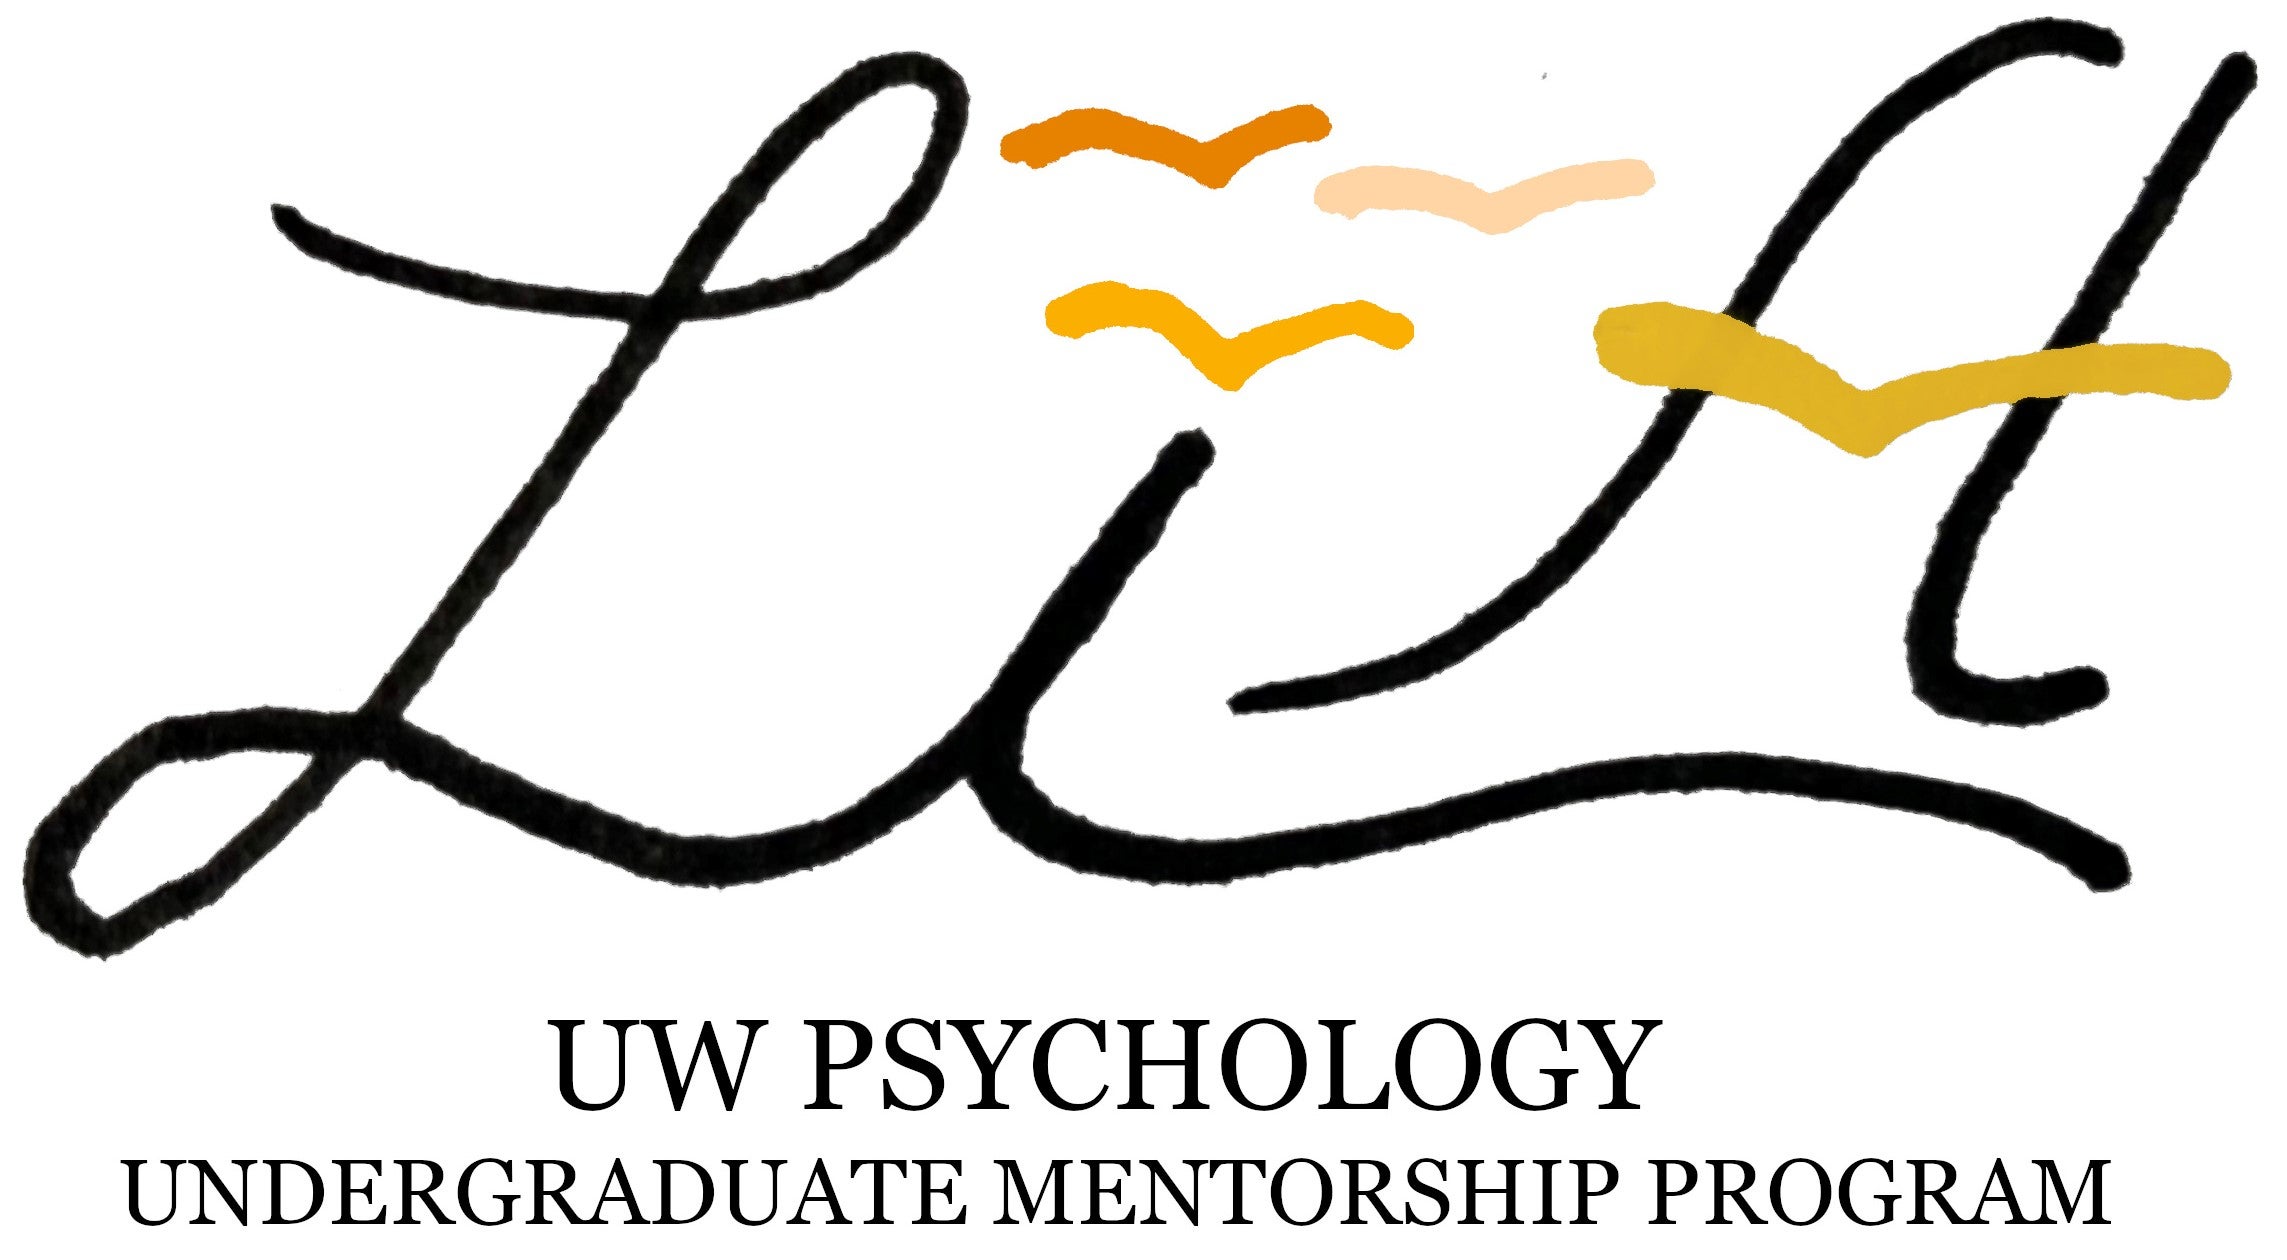 The word "Lift" is stylized and in cursive. Above the I there are four birds in the University of Waterloo Colours. Underneath it reads "UW PSYCHOLOGY", and underneath that it says "UNDERGRADUATE MENTORSHIP PROGRAM"